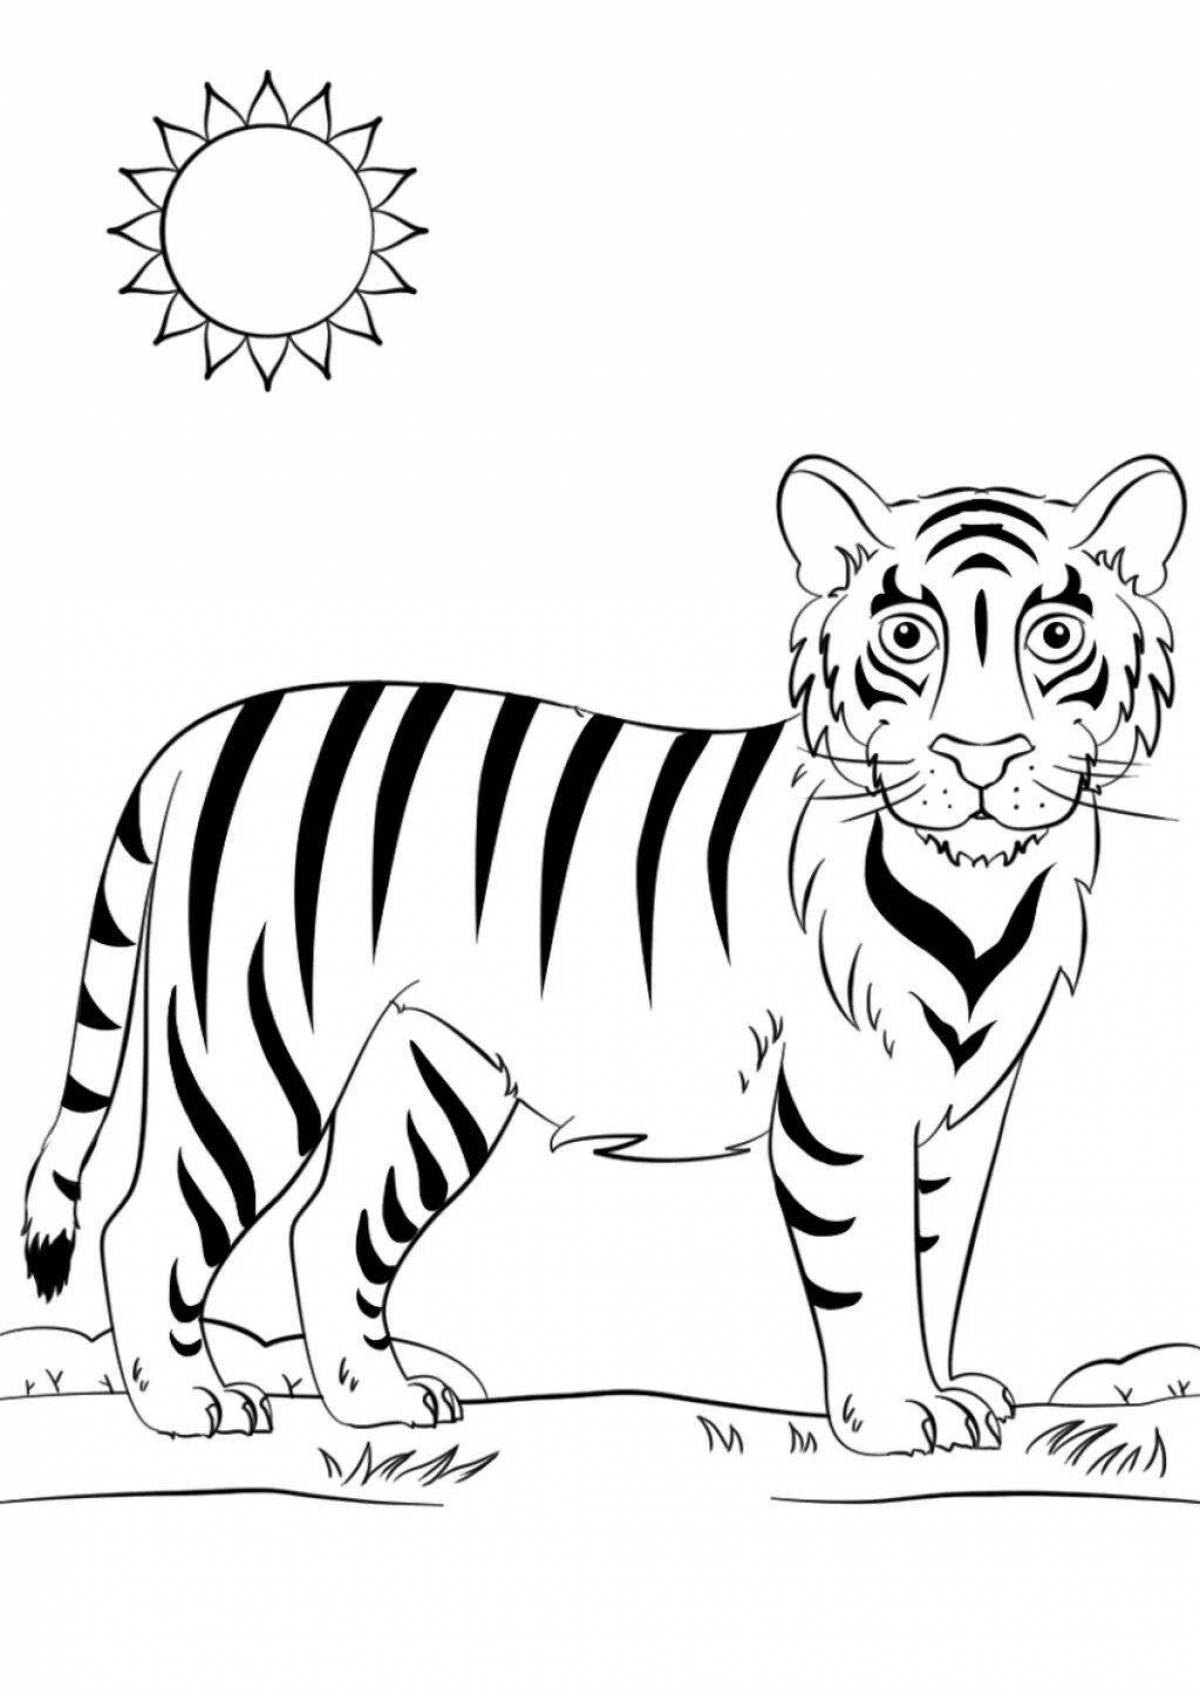 Outstanding tiger drawing for kids